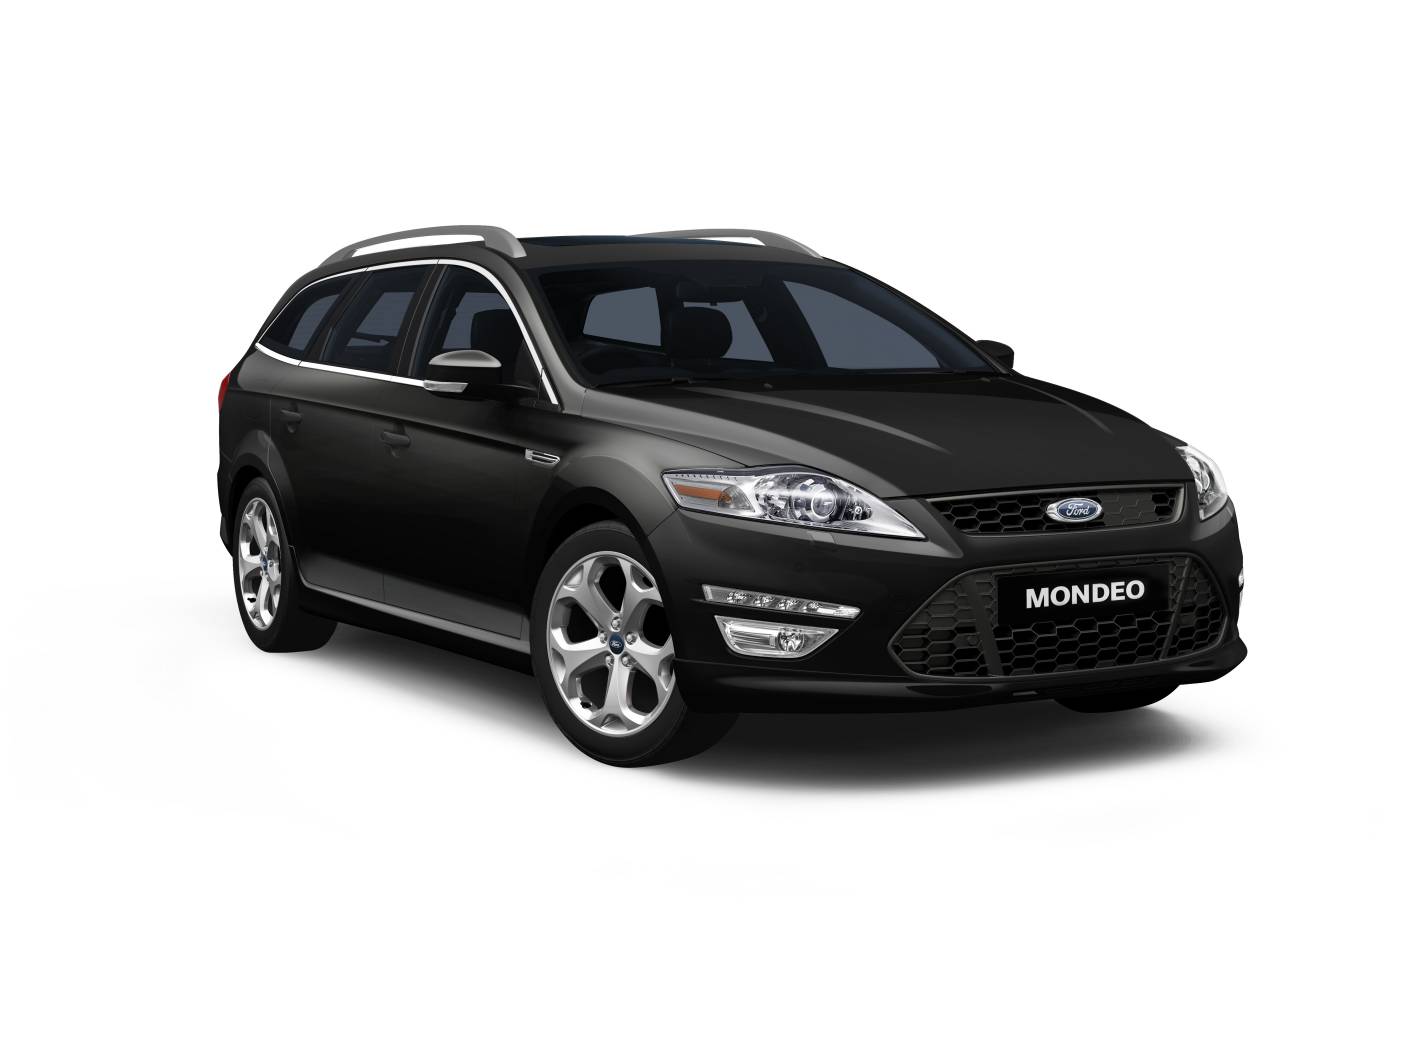 Ford Mondeo - Family Car | Ford UK